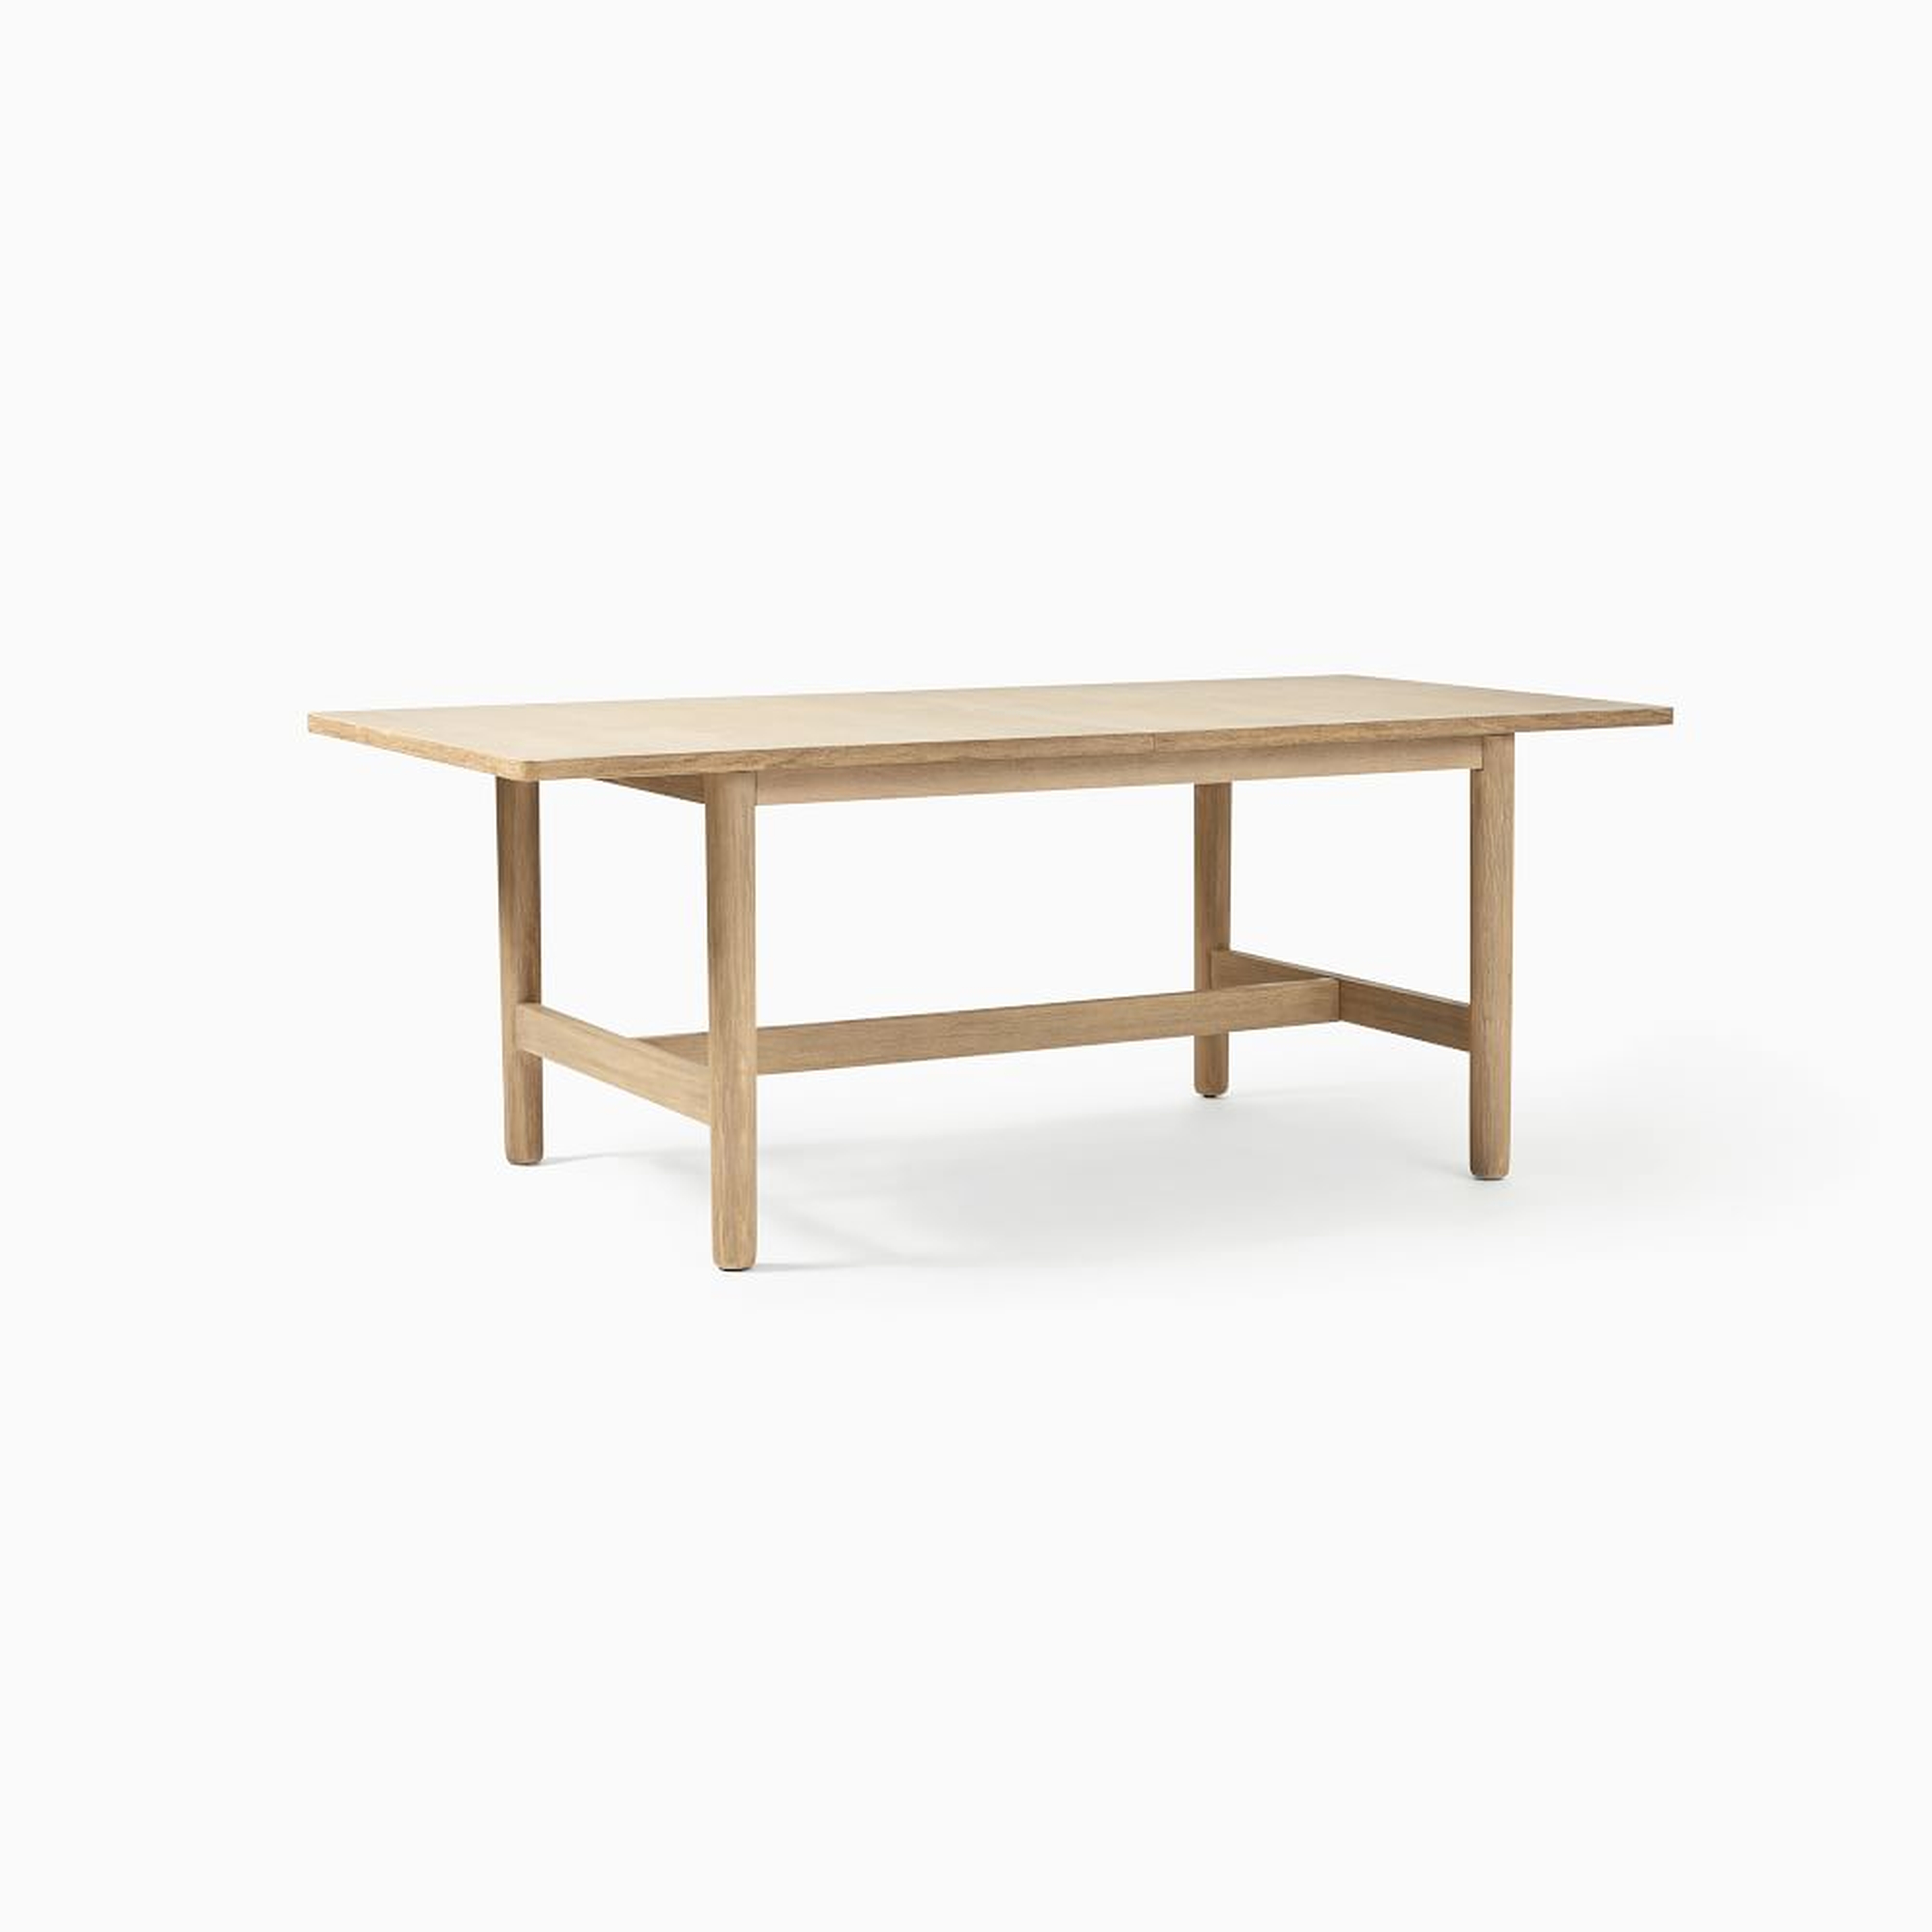 Hargrove 60"-80" Expandable Dining Table, Dune - West Elm